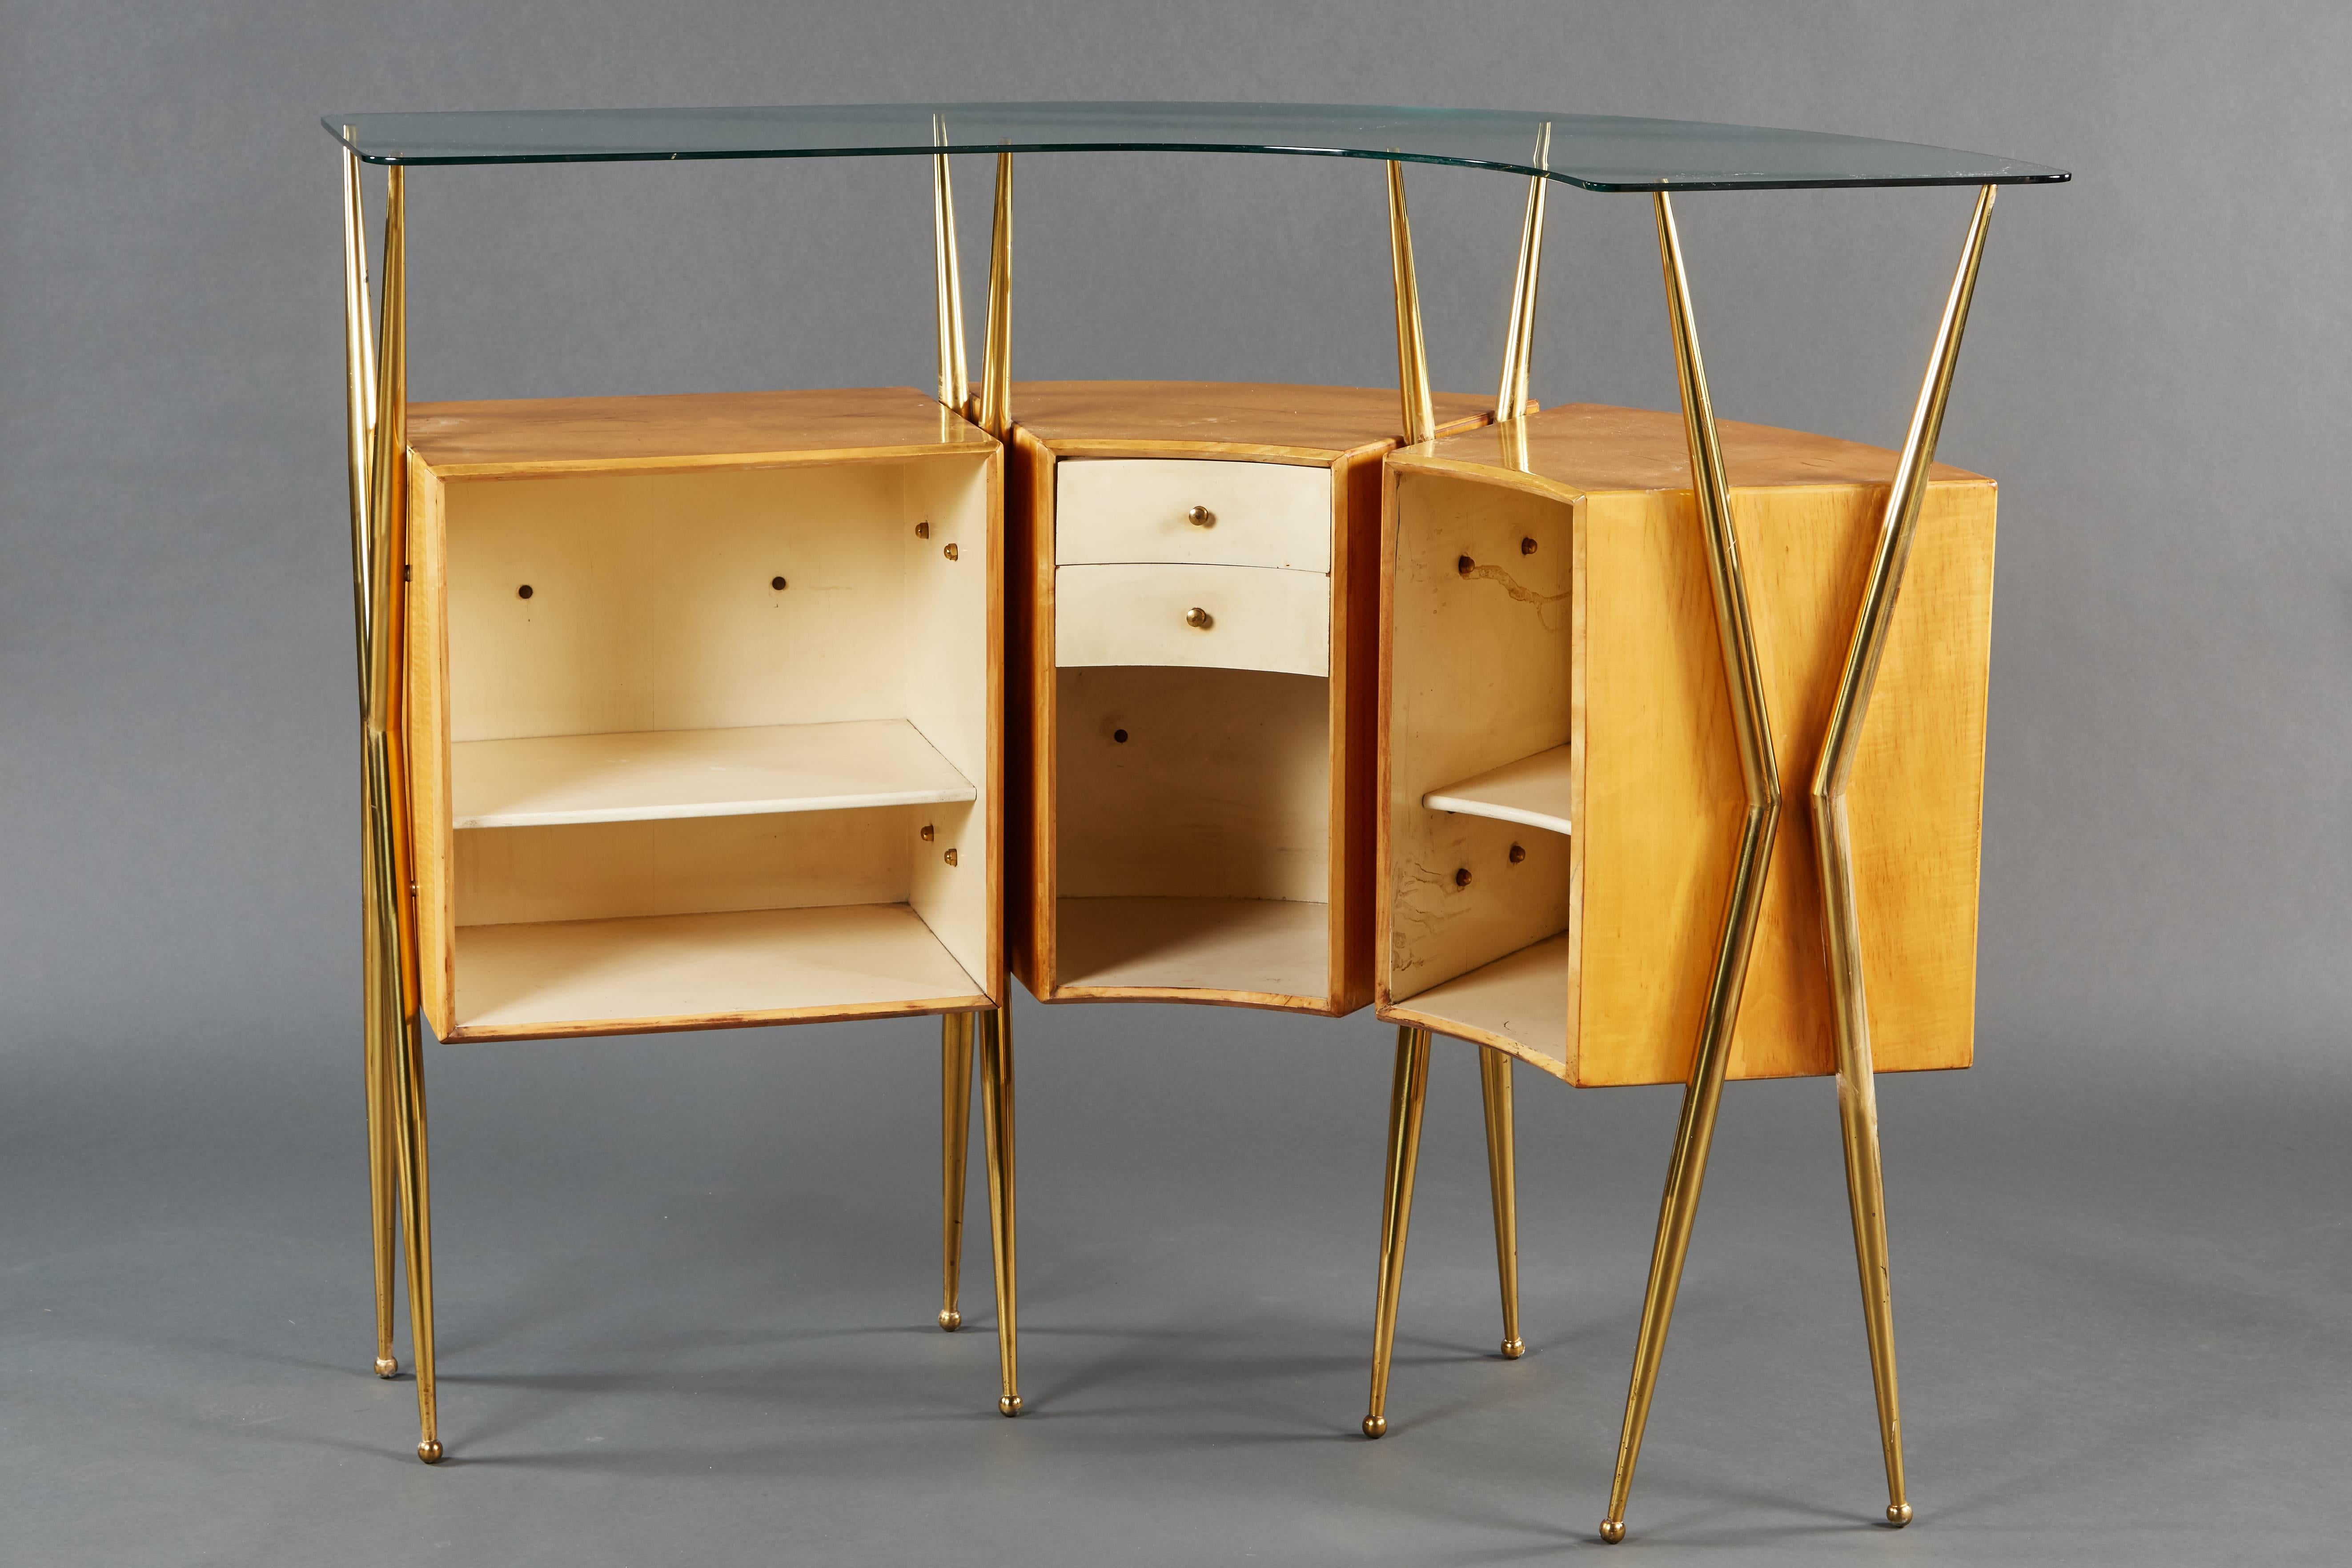 An elegant Italian bar cabinet, featuring a curvilinear design, mounted scenic illustrations and tapered brass legs.